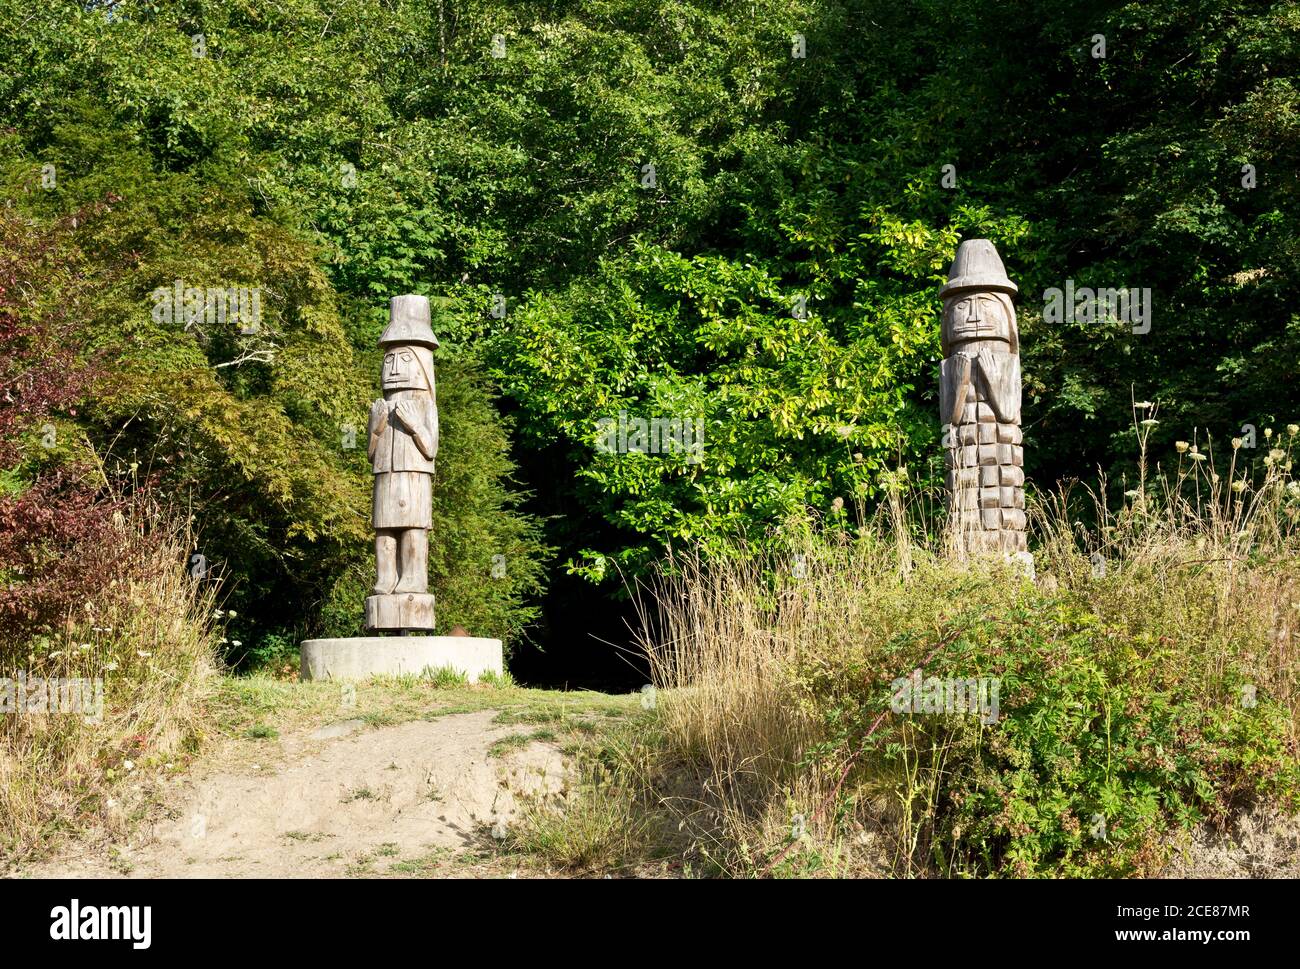 Two Indigenous Welcome Poles face the beach at Burgoyne Bay on Salt Spring Island, British Columbia, Canada Stock Photo